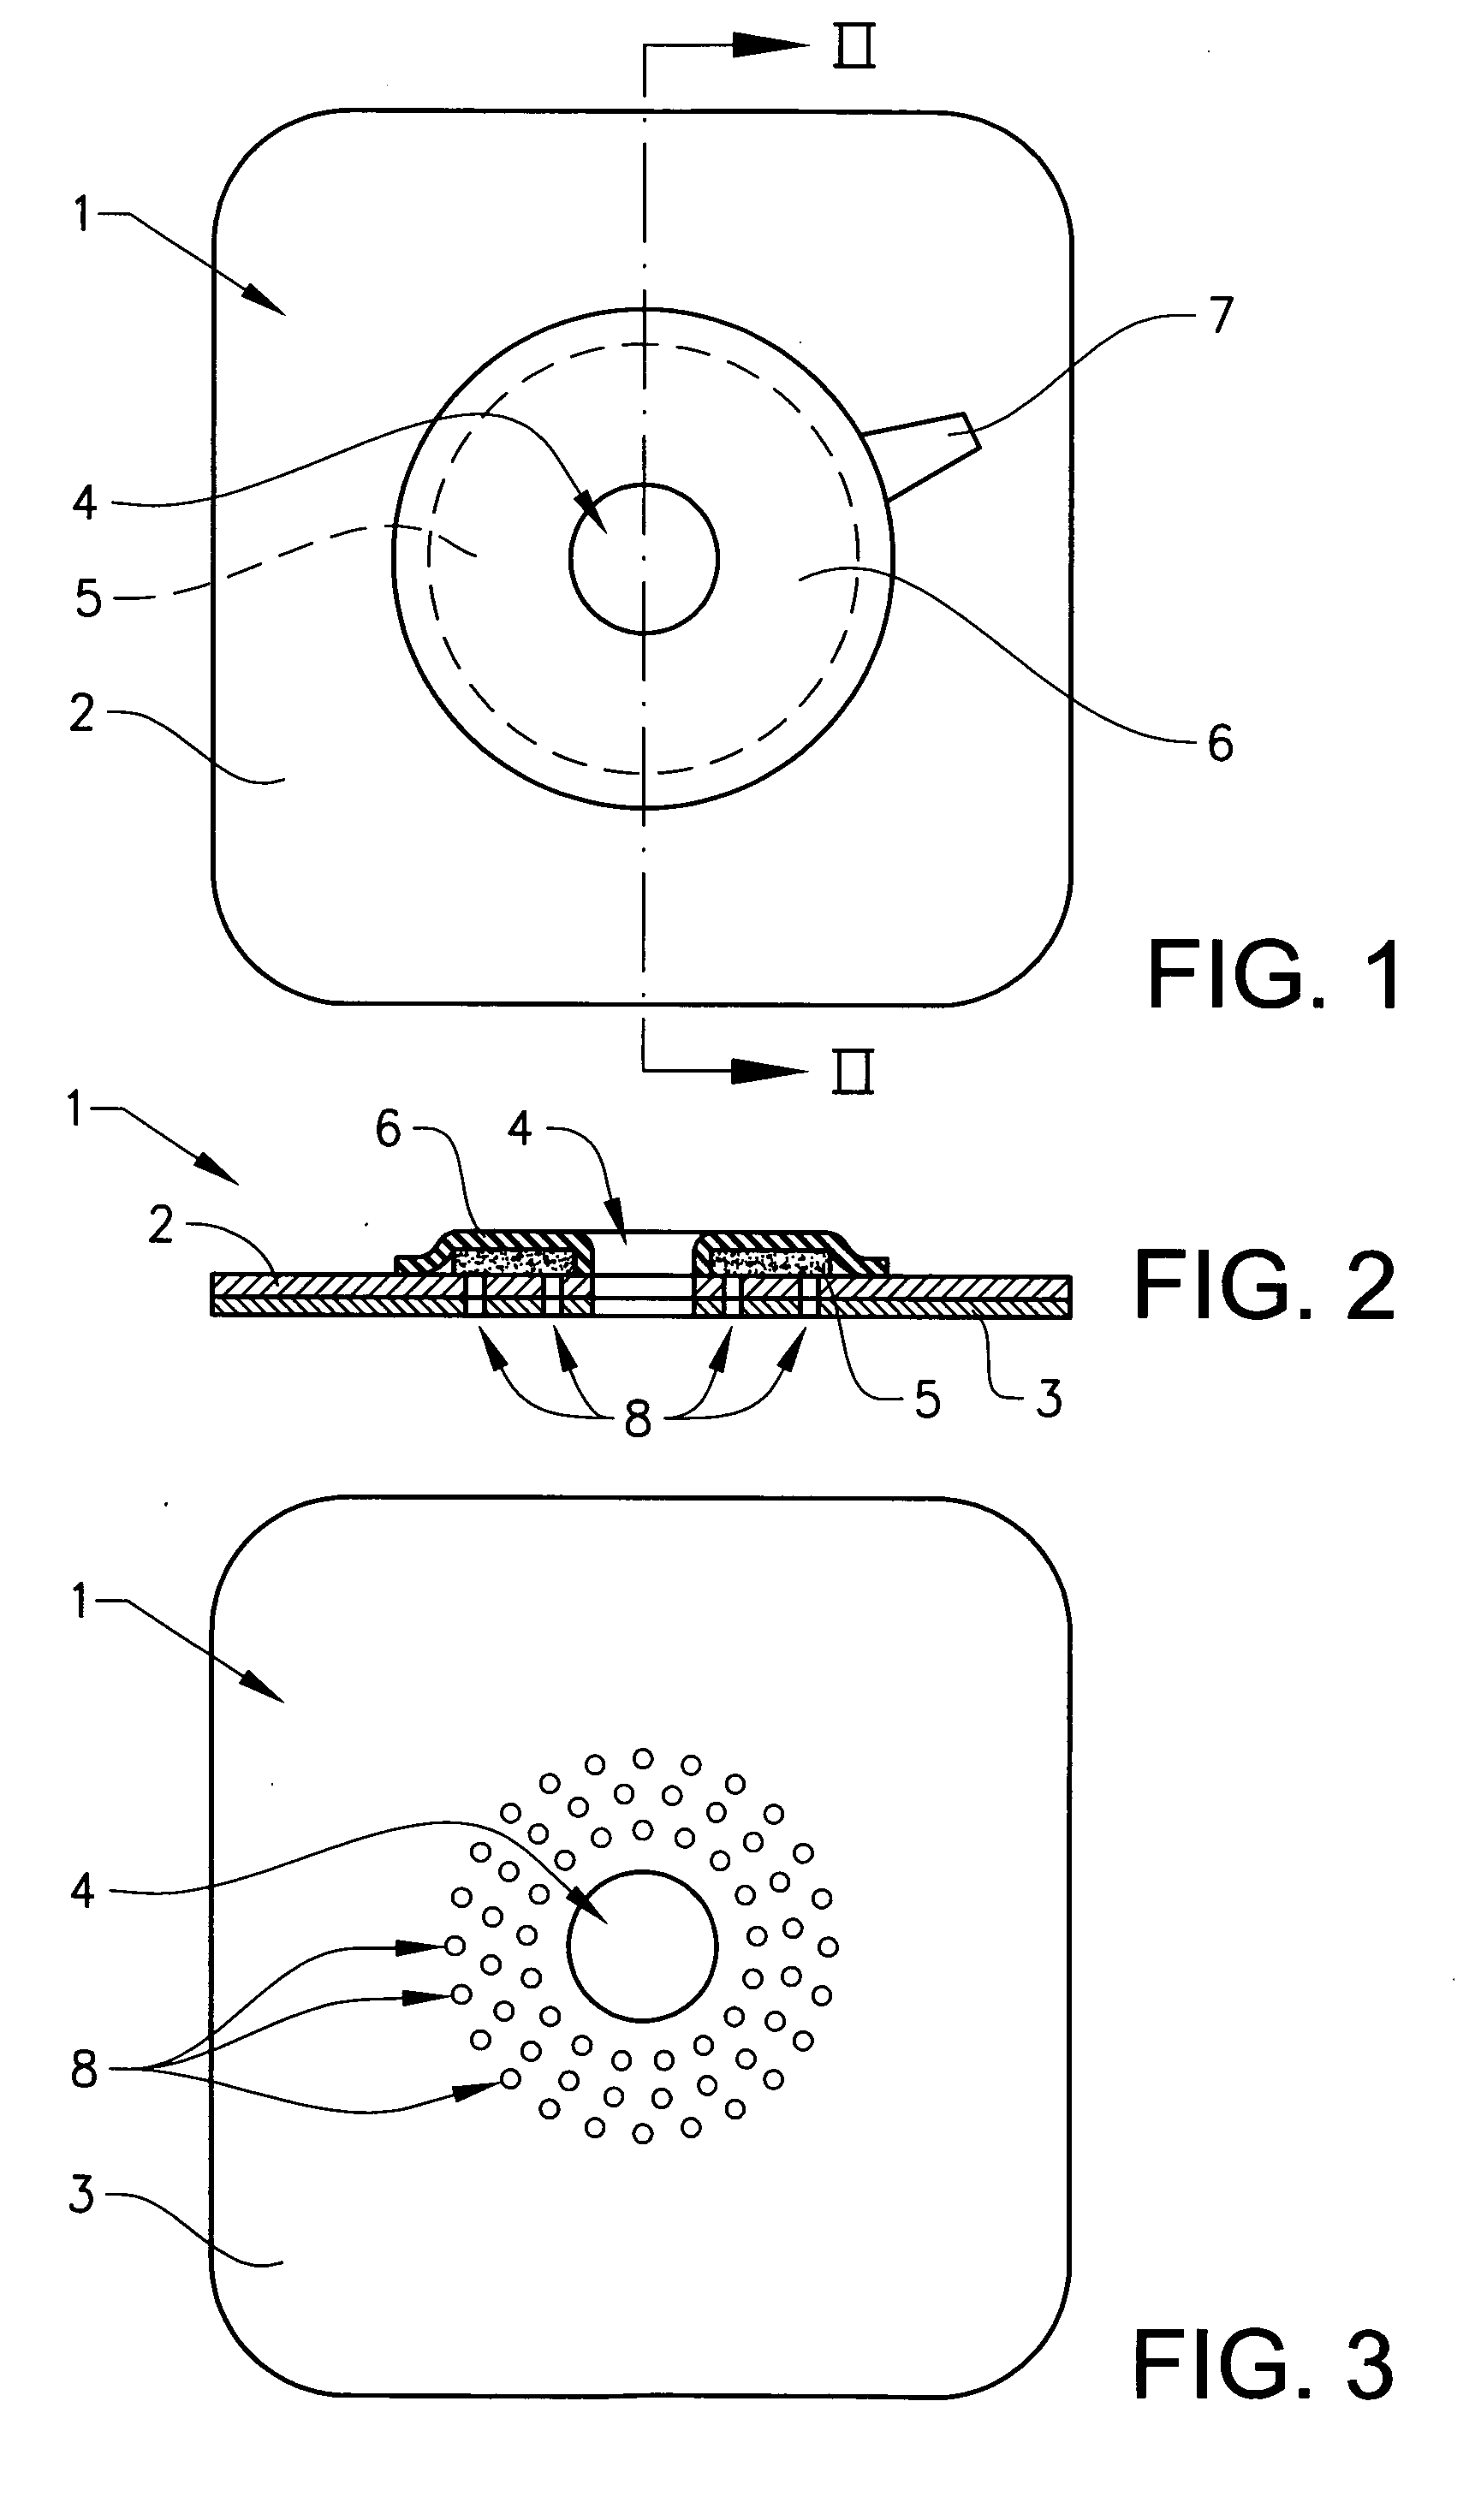 Component for securing attachment of a medical device to skin